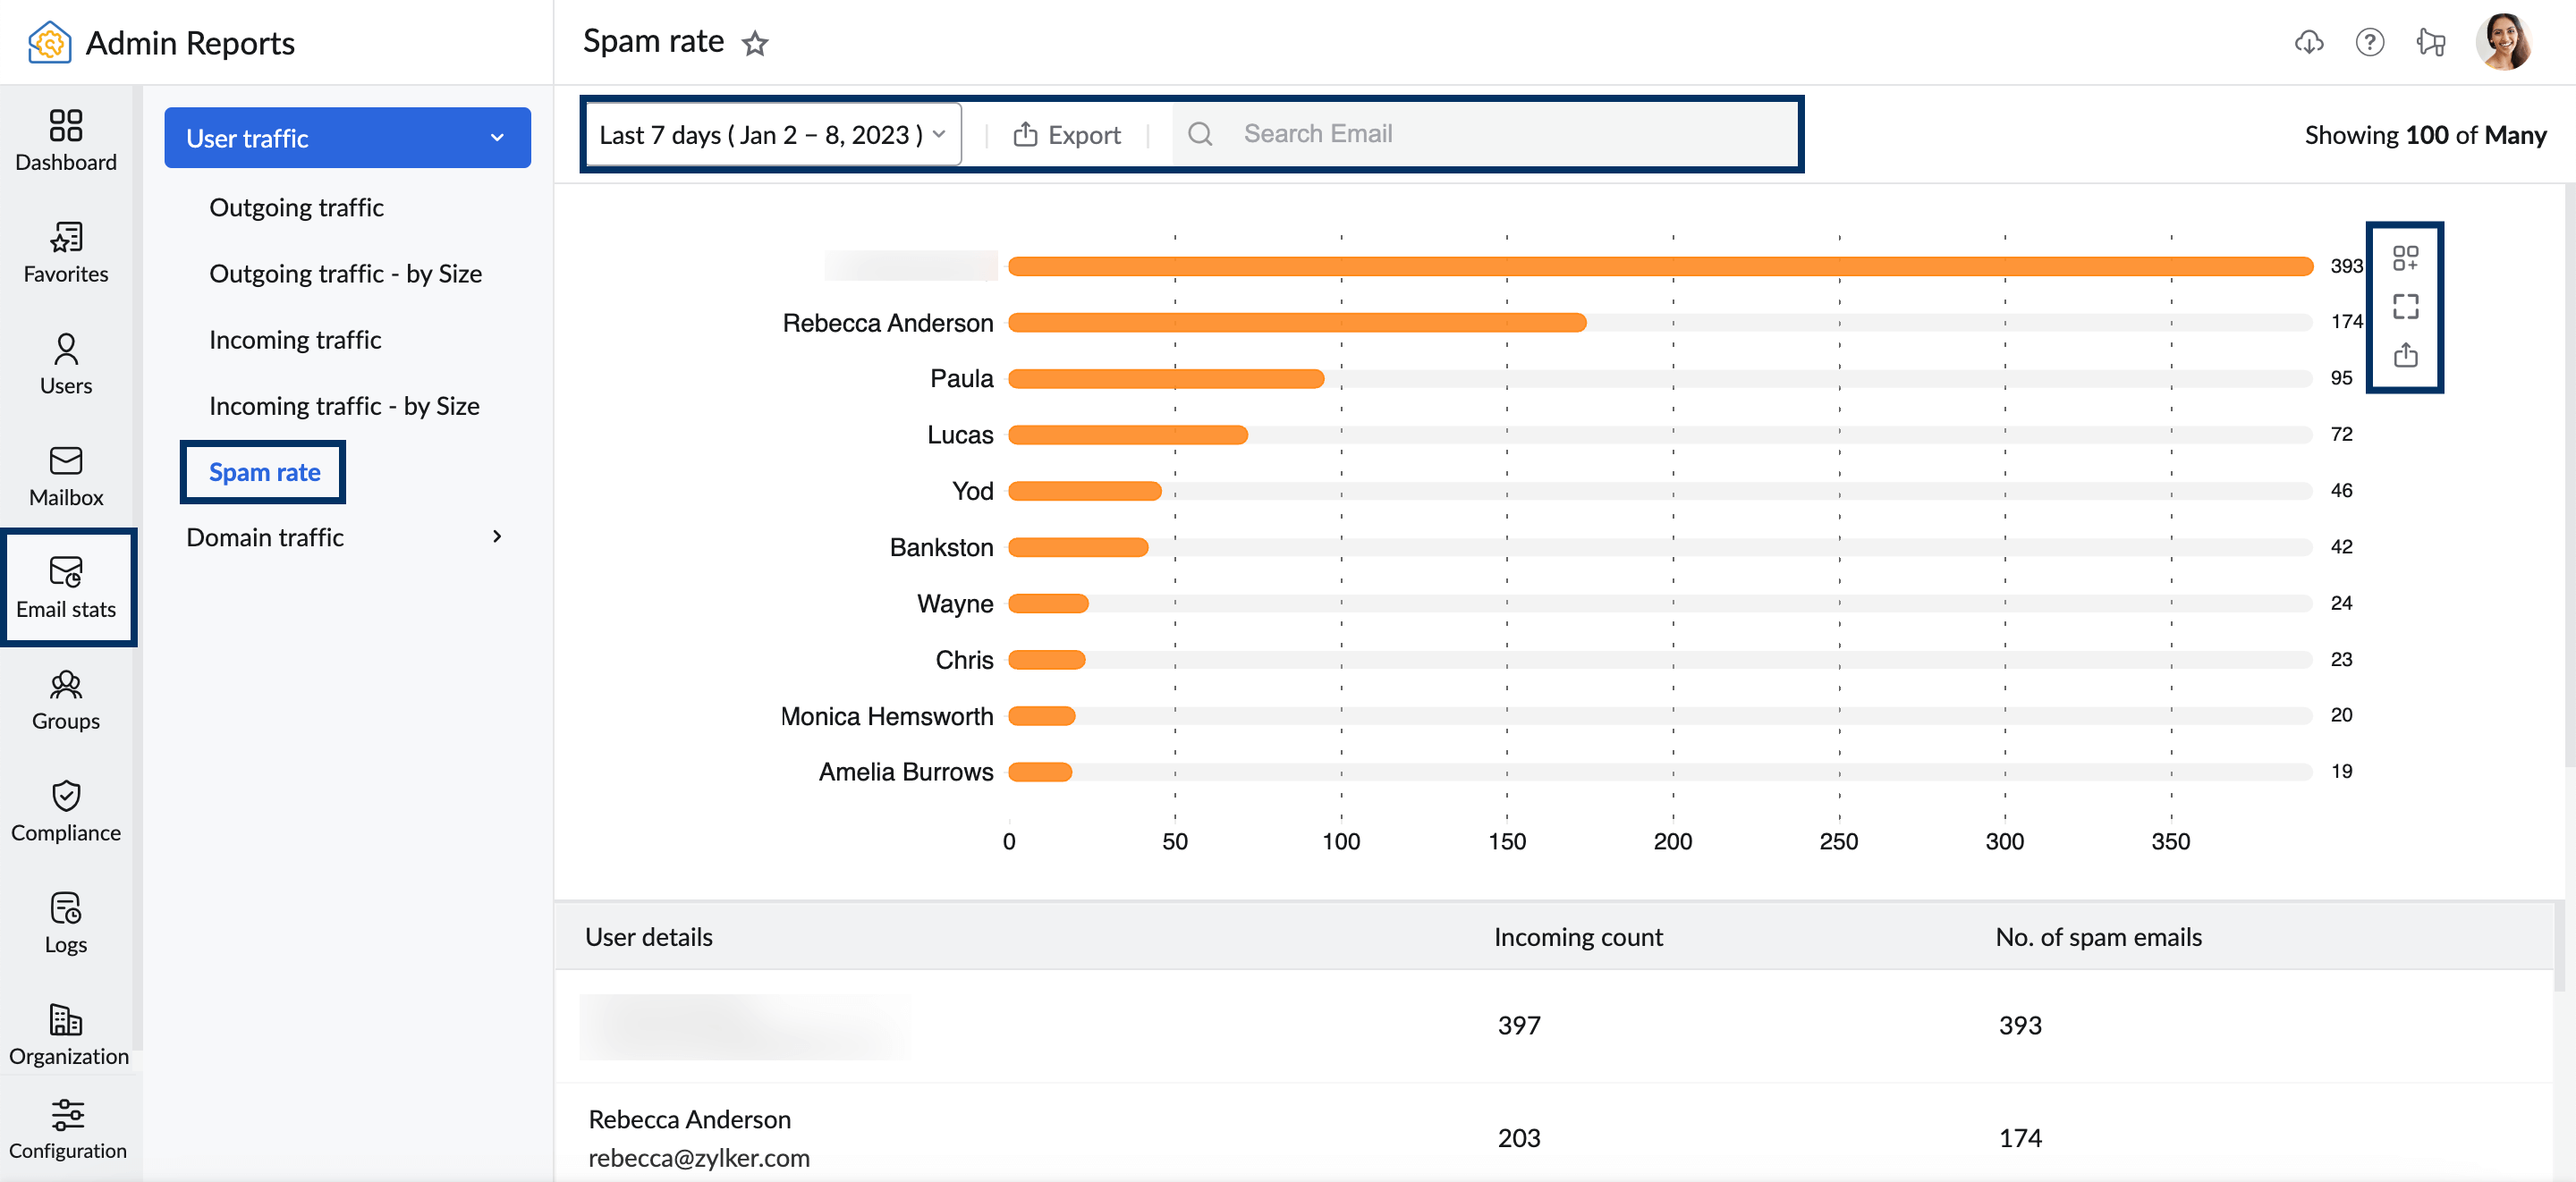 spam rate report